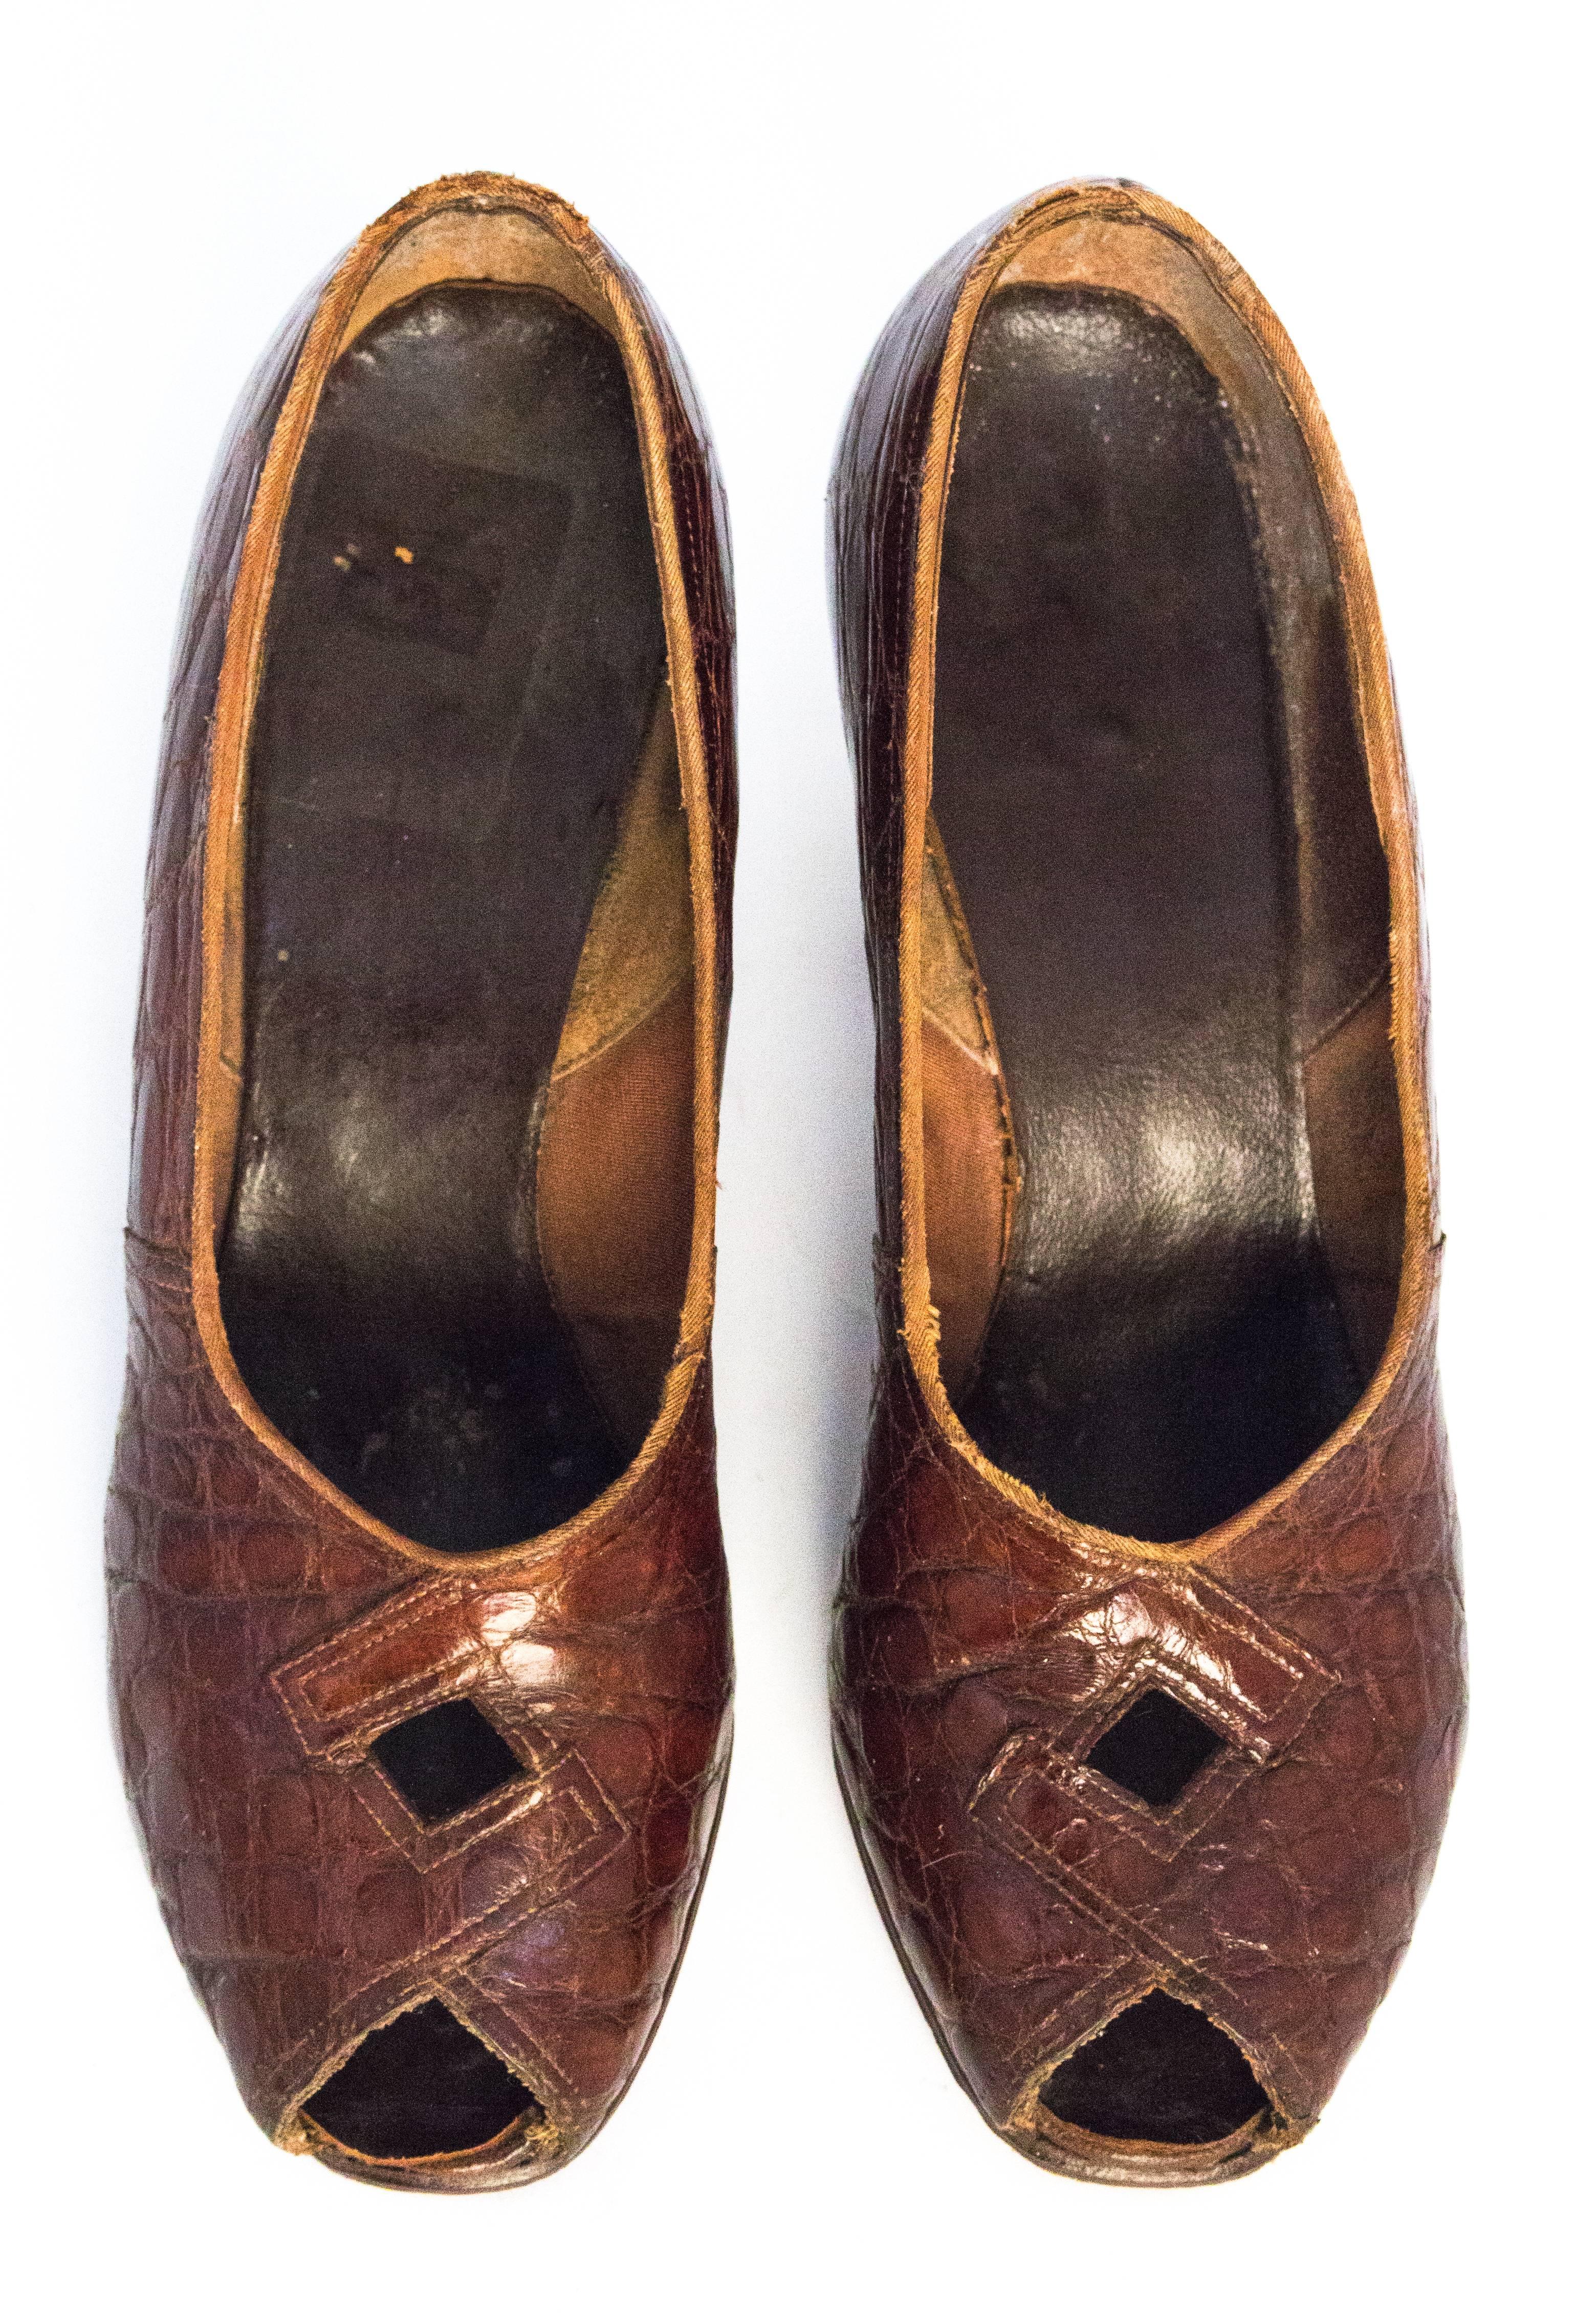 30s sienna brown peep toe heels. Geometric cutouts on toe tops. Leather soles.

Measurements:
Insole: 9.5 inches
Palm: 2 7/8 inches
Heel: 3 inches